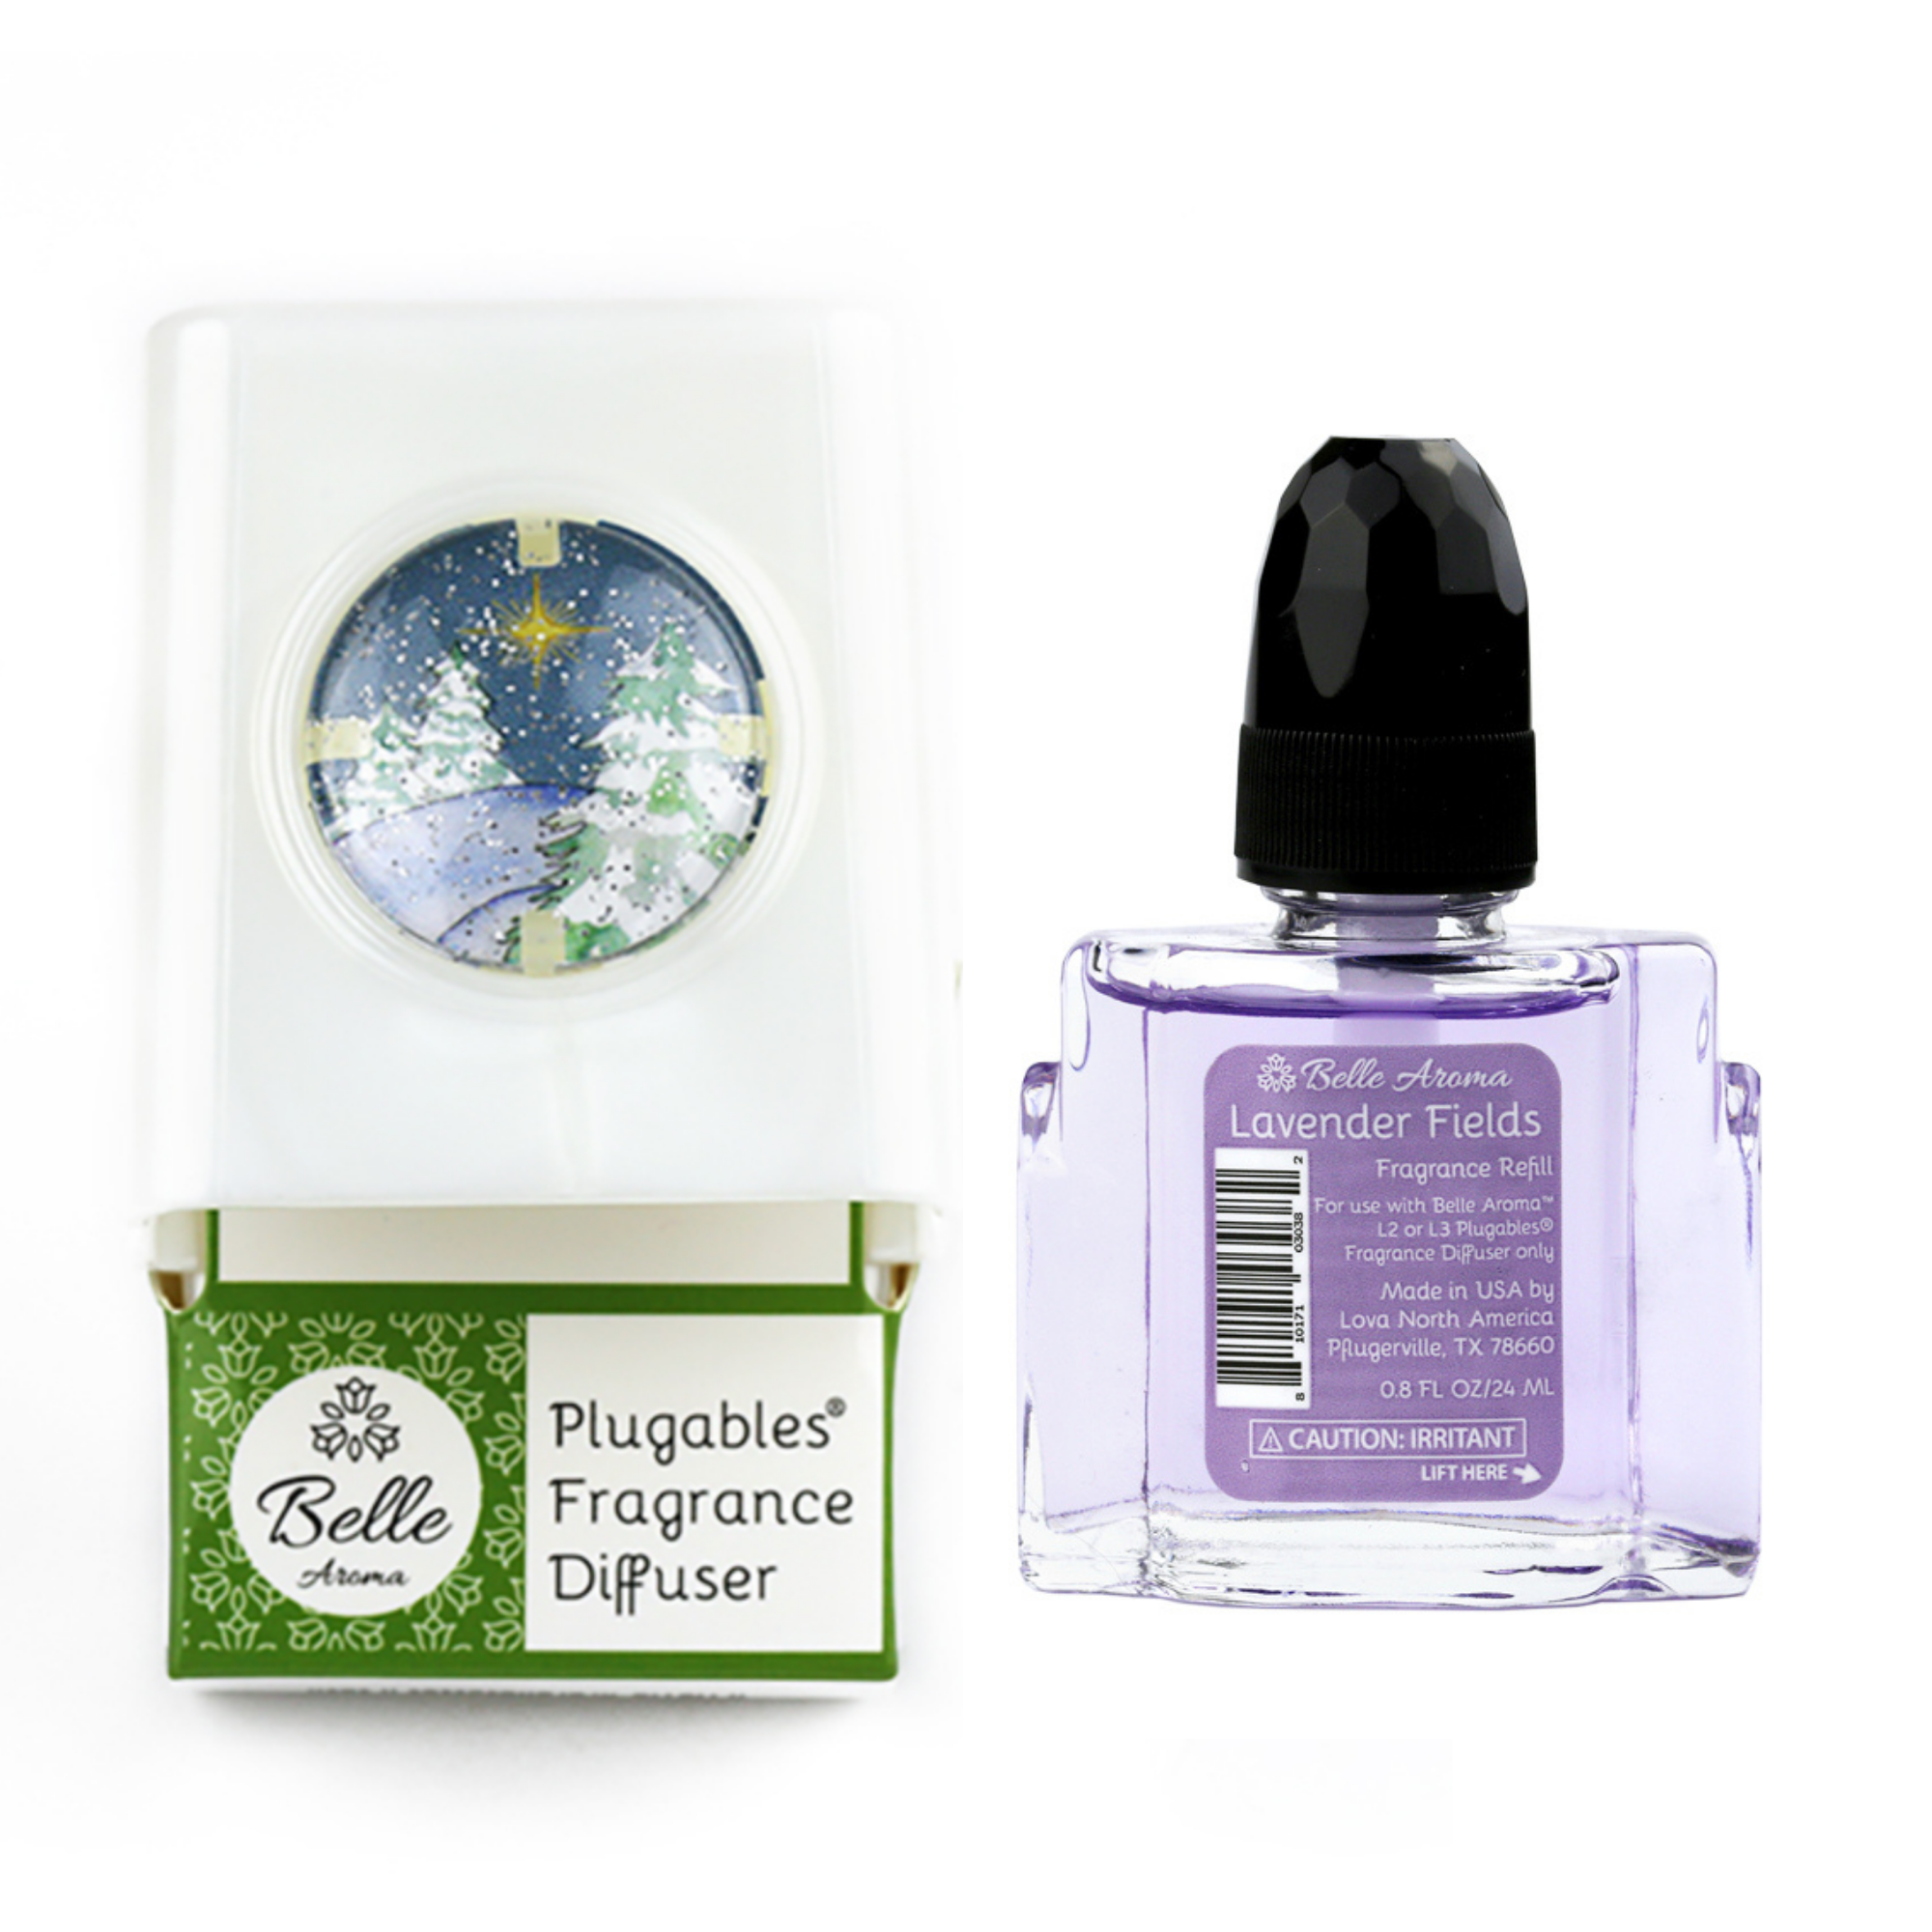 Glitter Domes™ Plugables® Electric Scented Oil Diffuser - Snowy Scene with Lavender Fields Fragrance Oil Home Fragrance Accessories